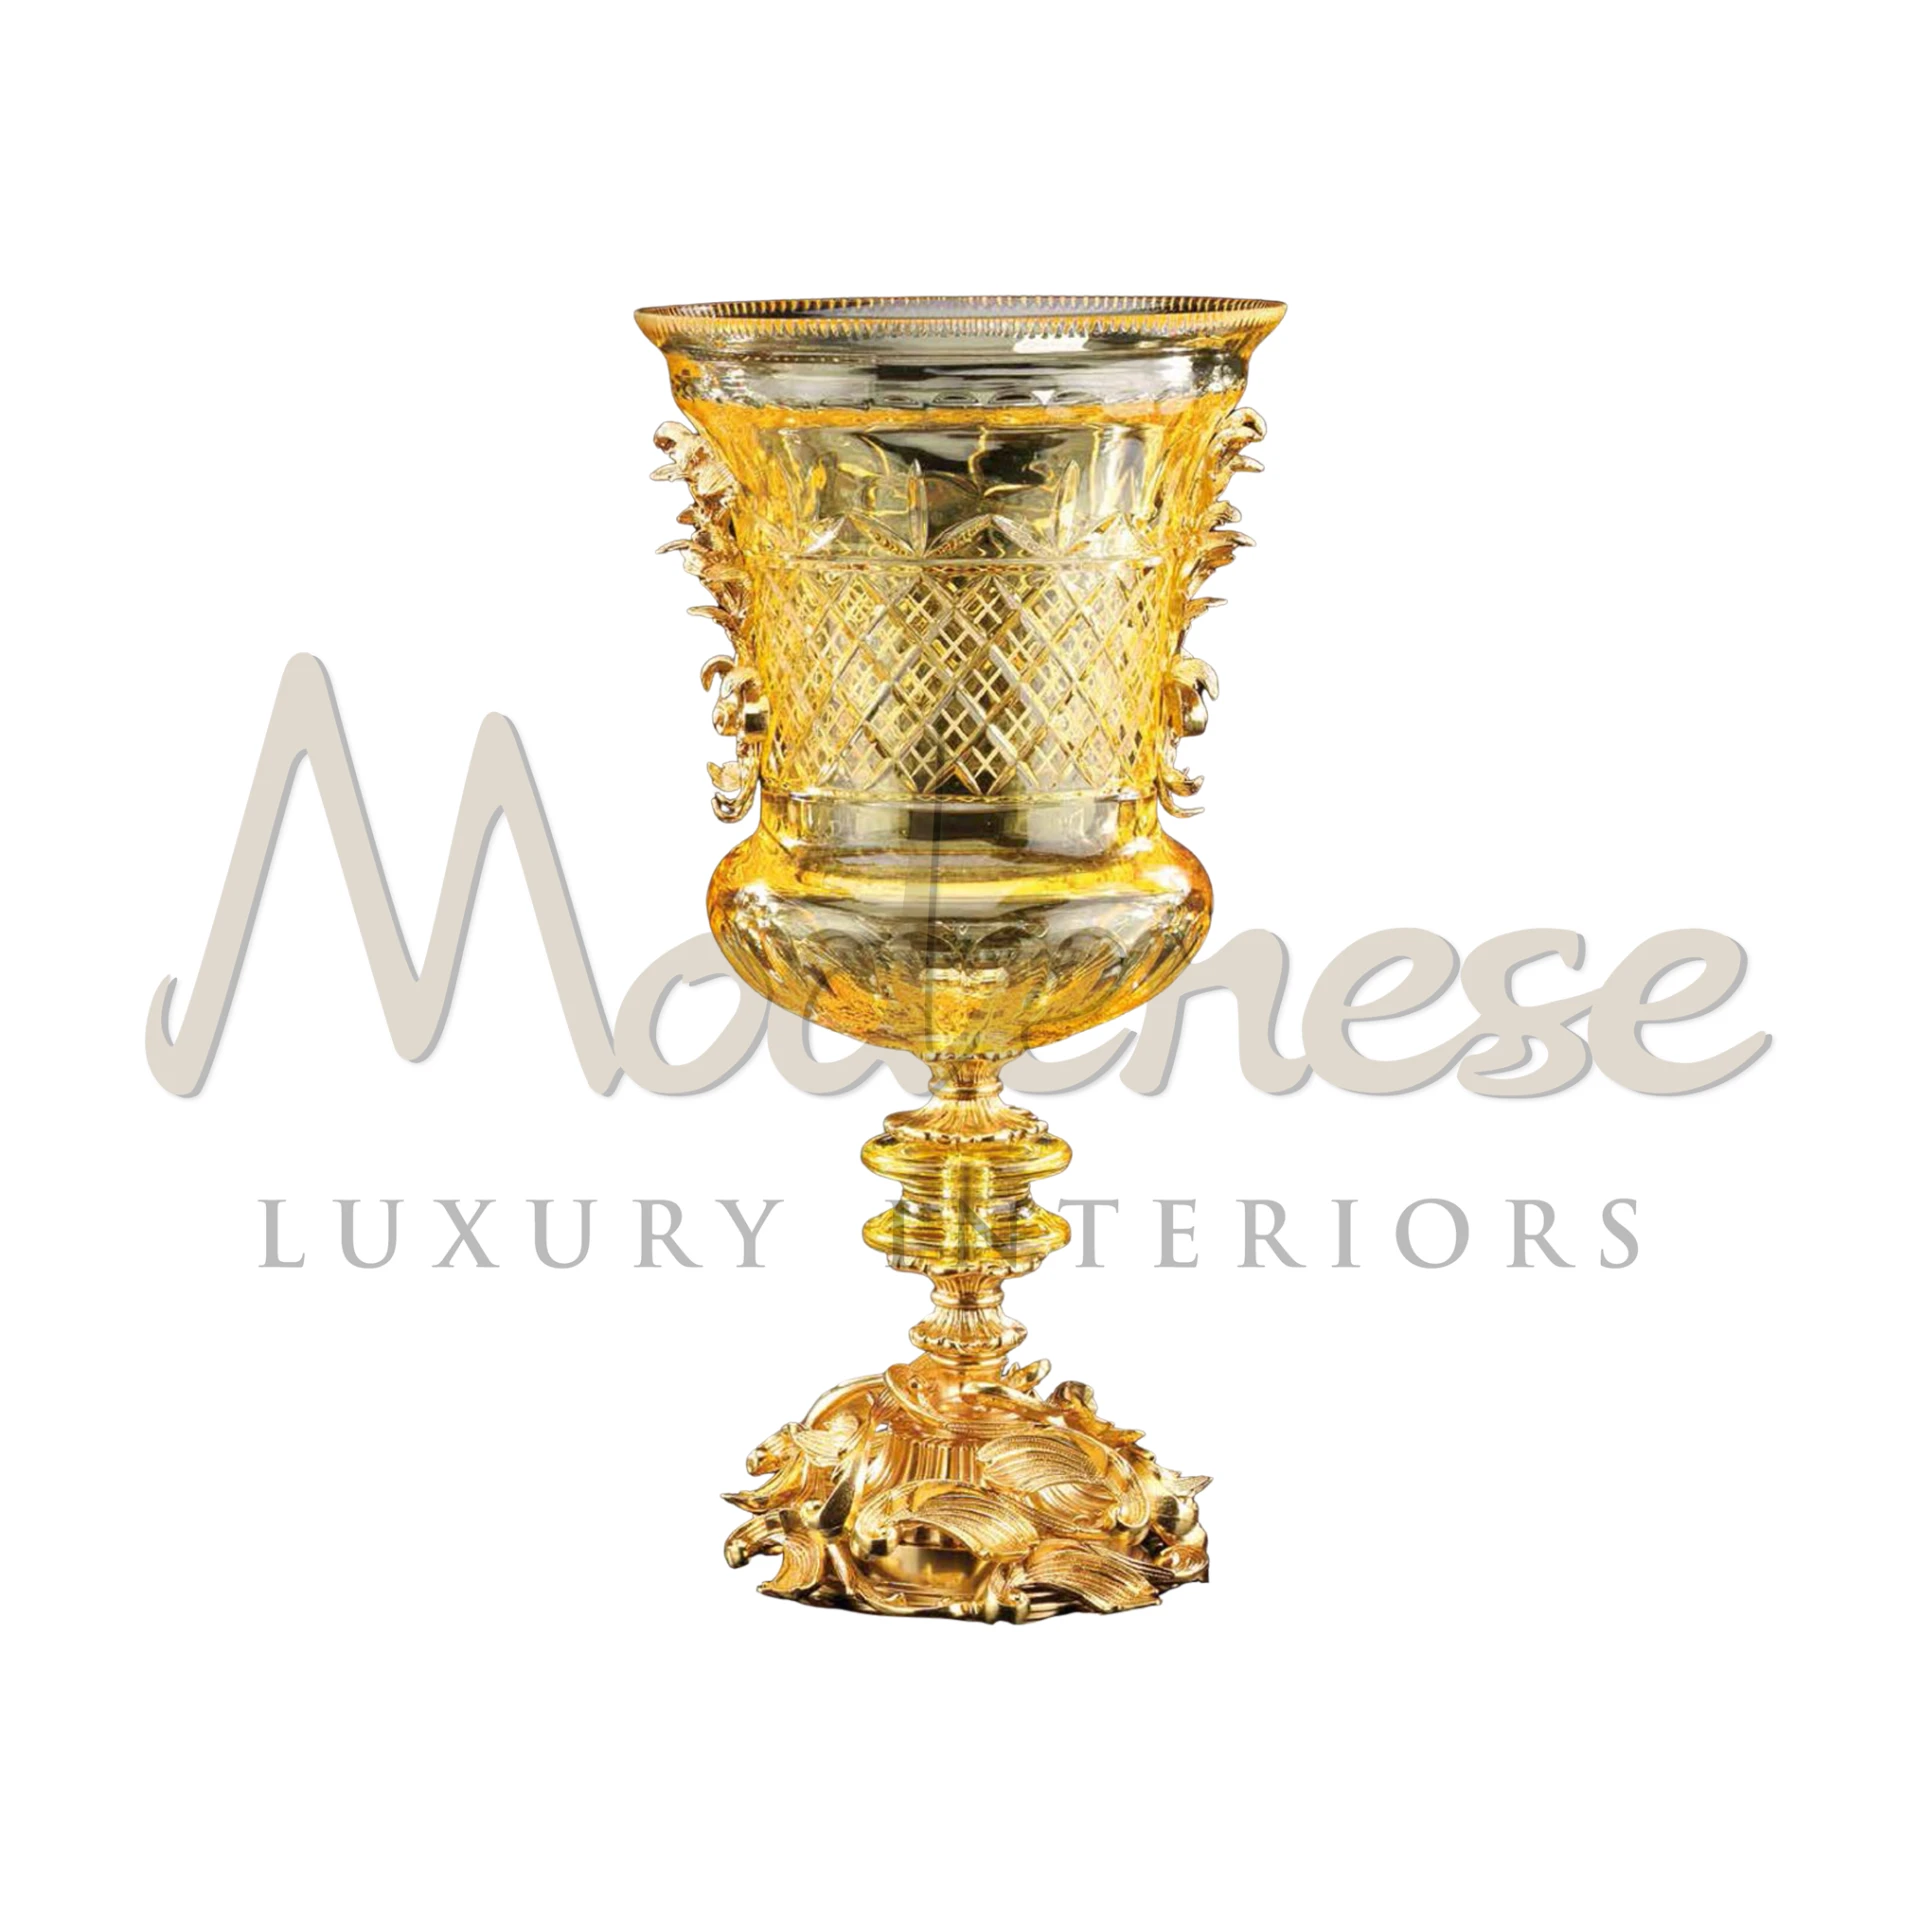 Gorgeous glass vase with classic gold leaf design, adding a touch of luxury and elegance to interior spaces